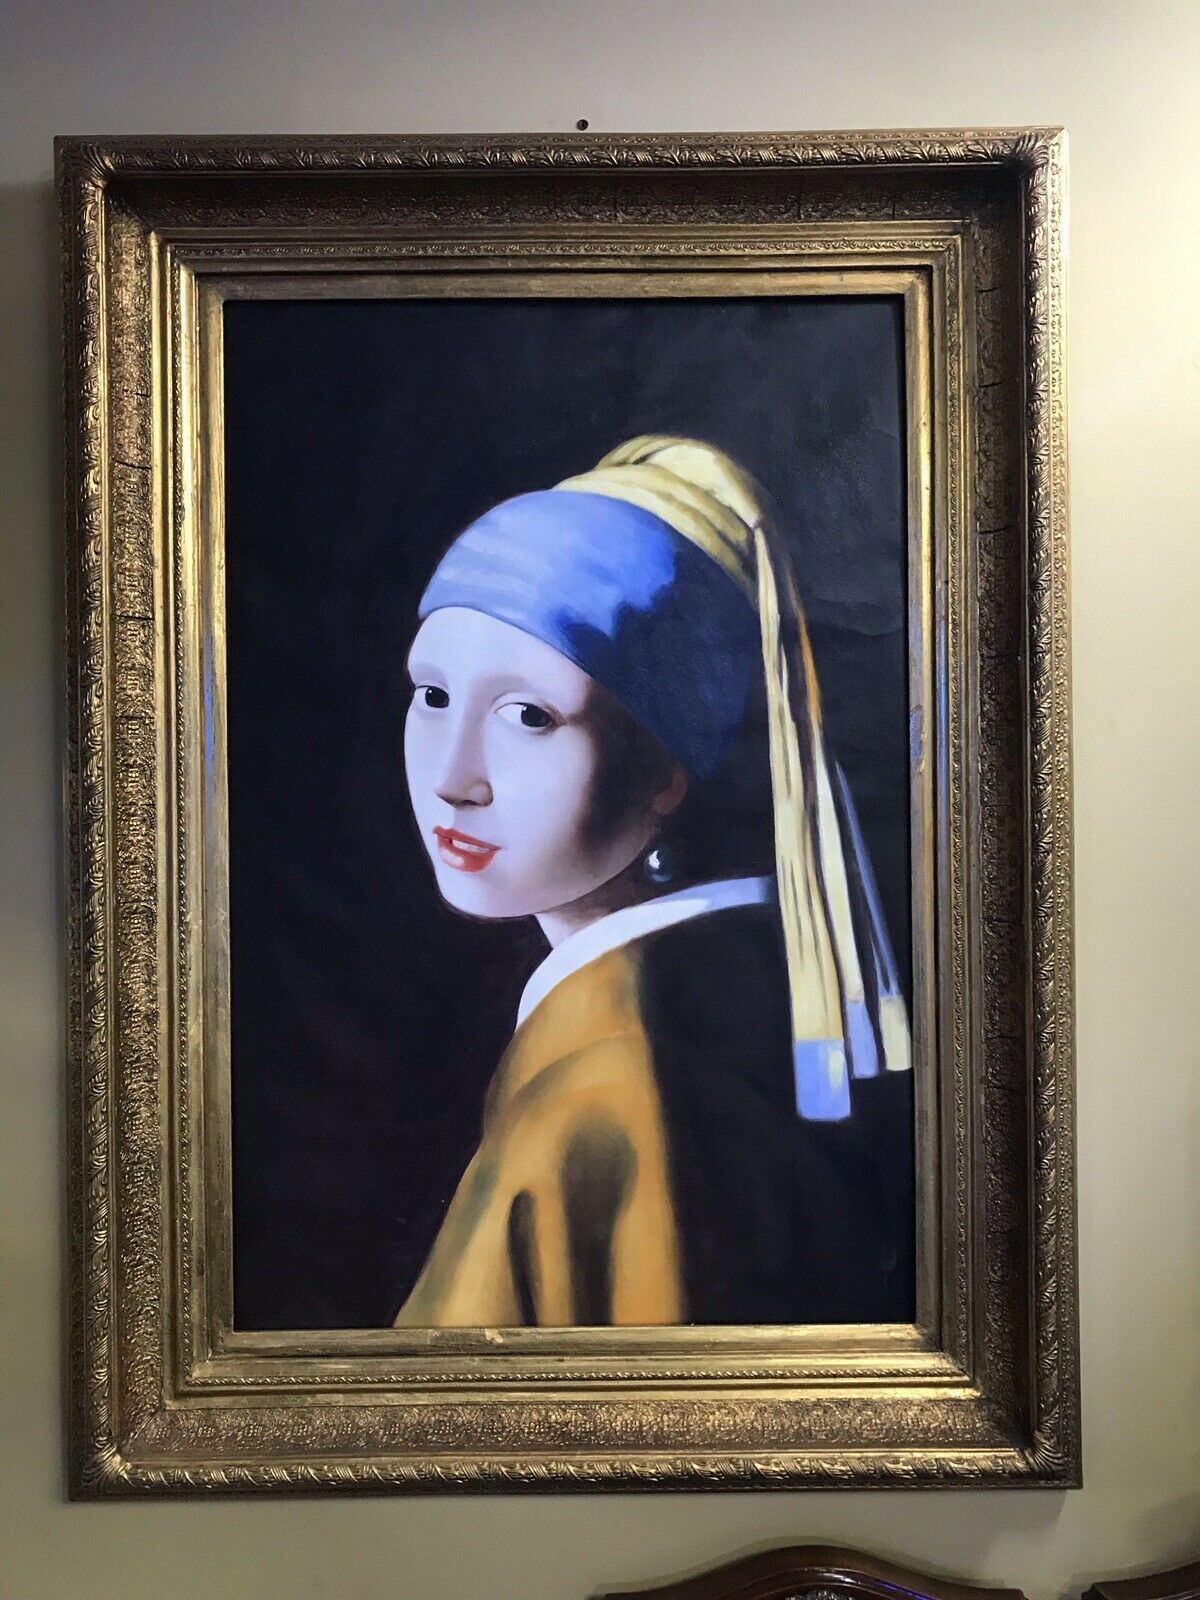 Grand Oil Painting After Vermeer Set In Gilt Frame - Image 2 of 2